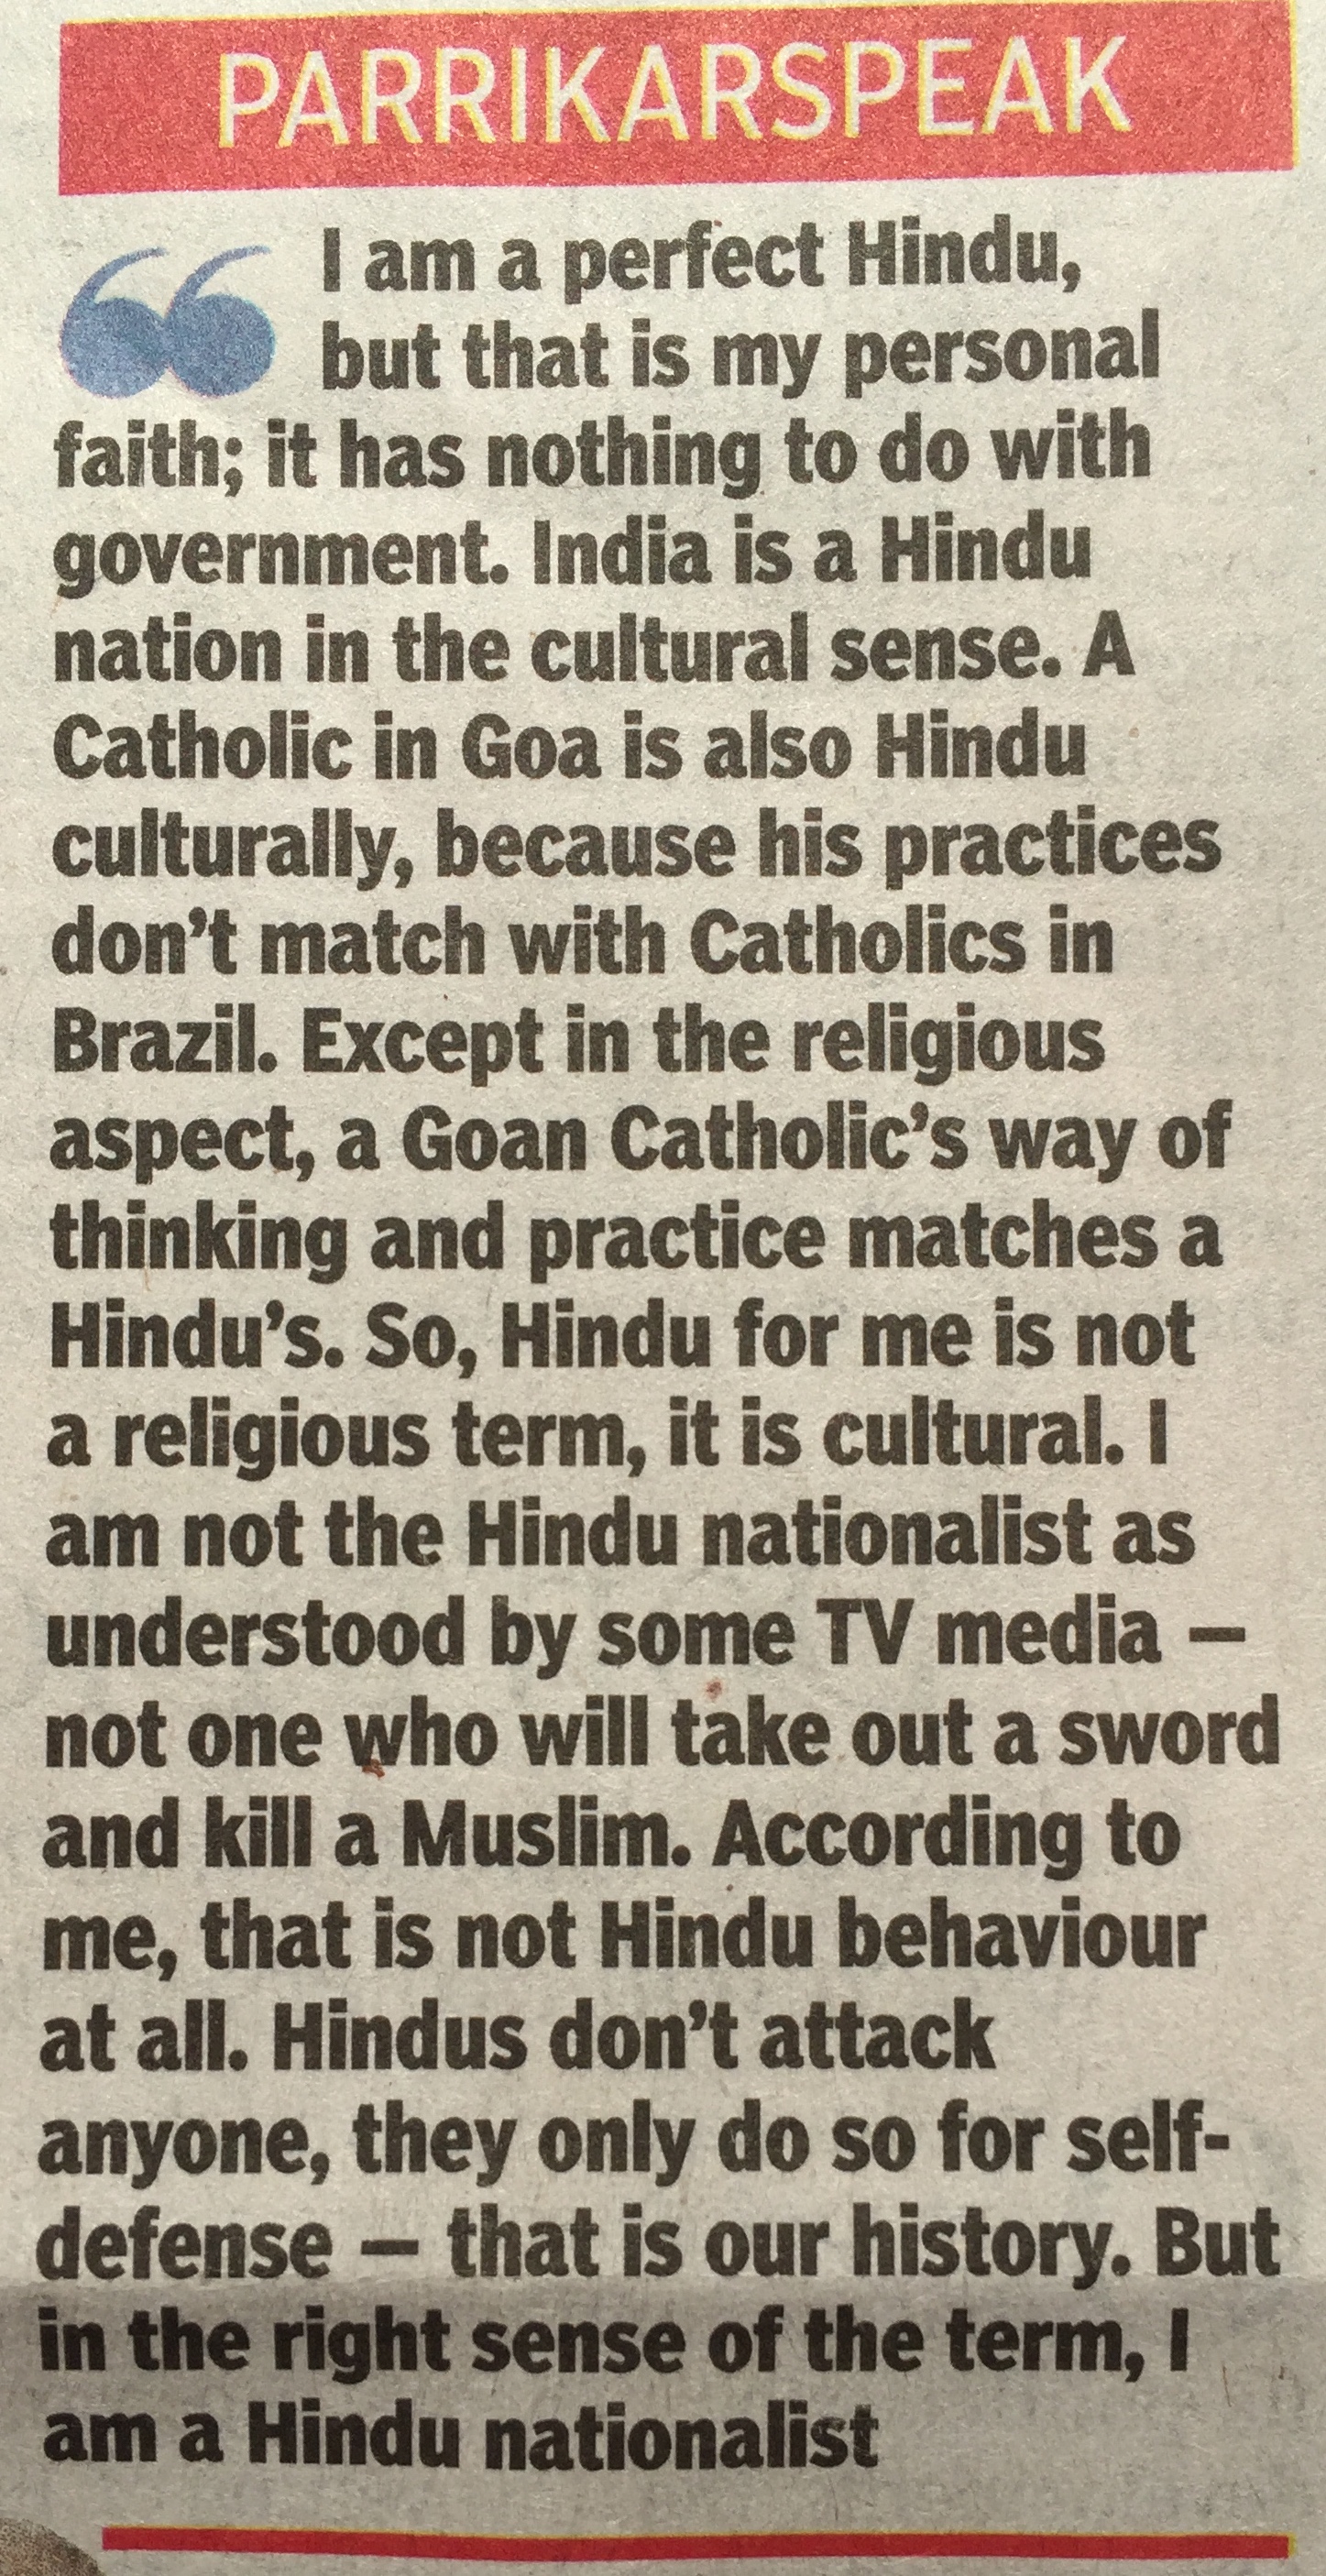 Parrikar, Times of India, March 18, p 11